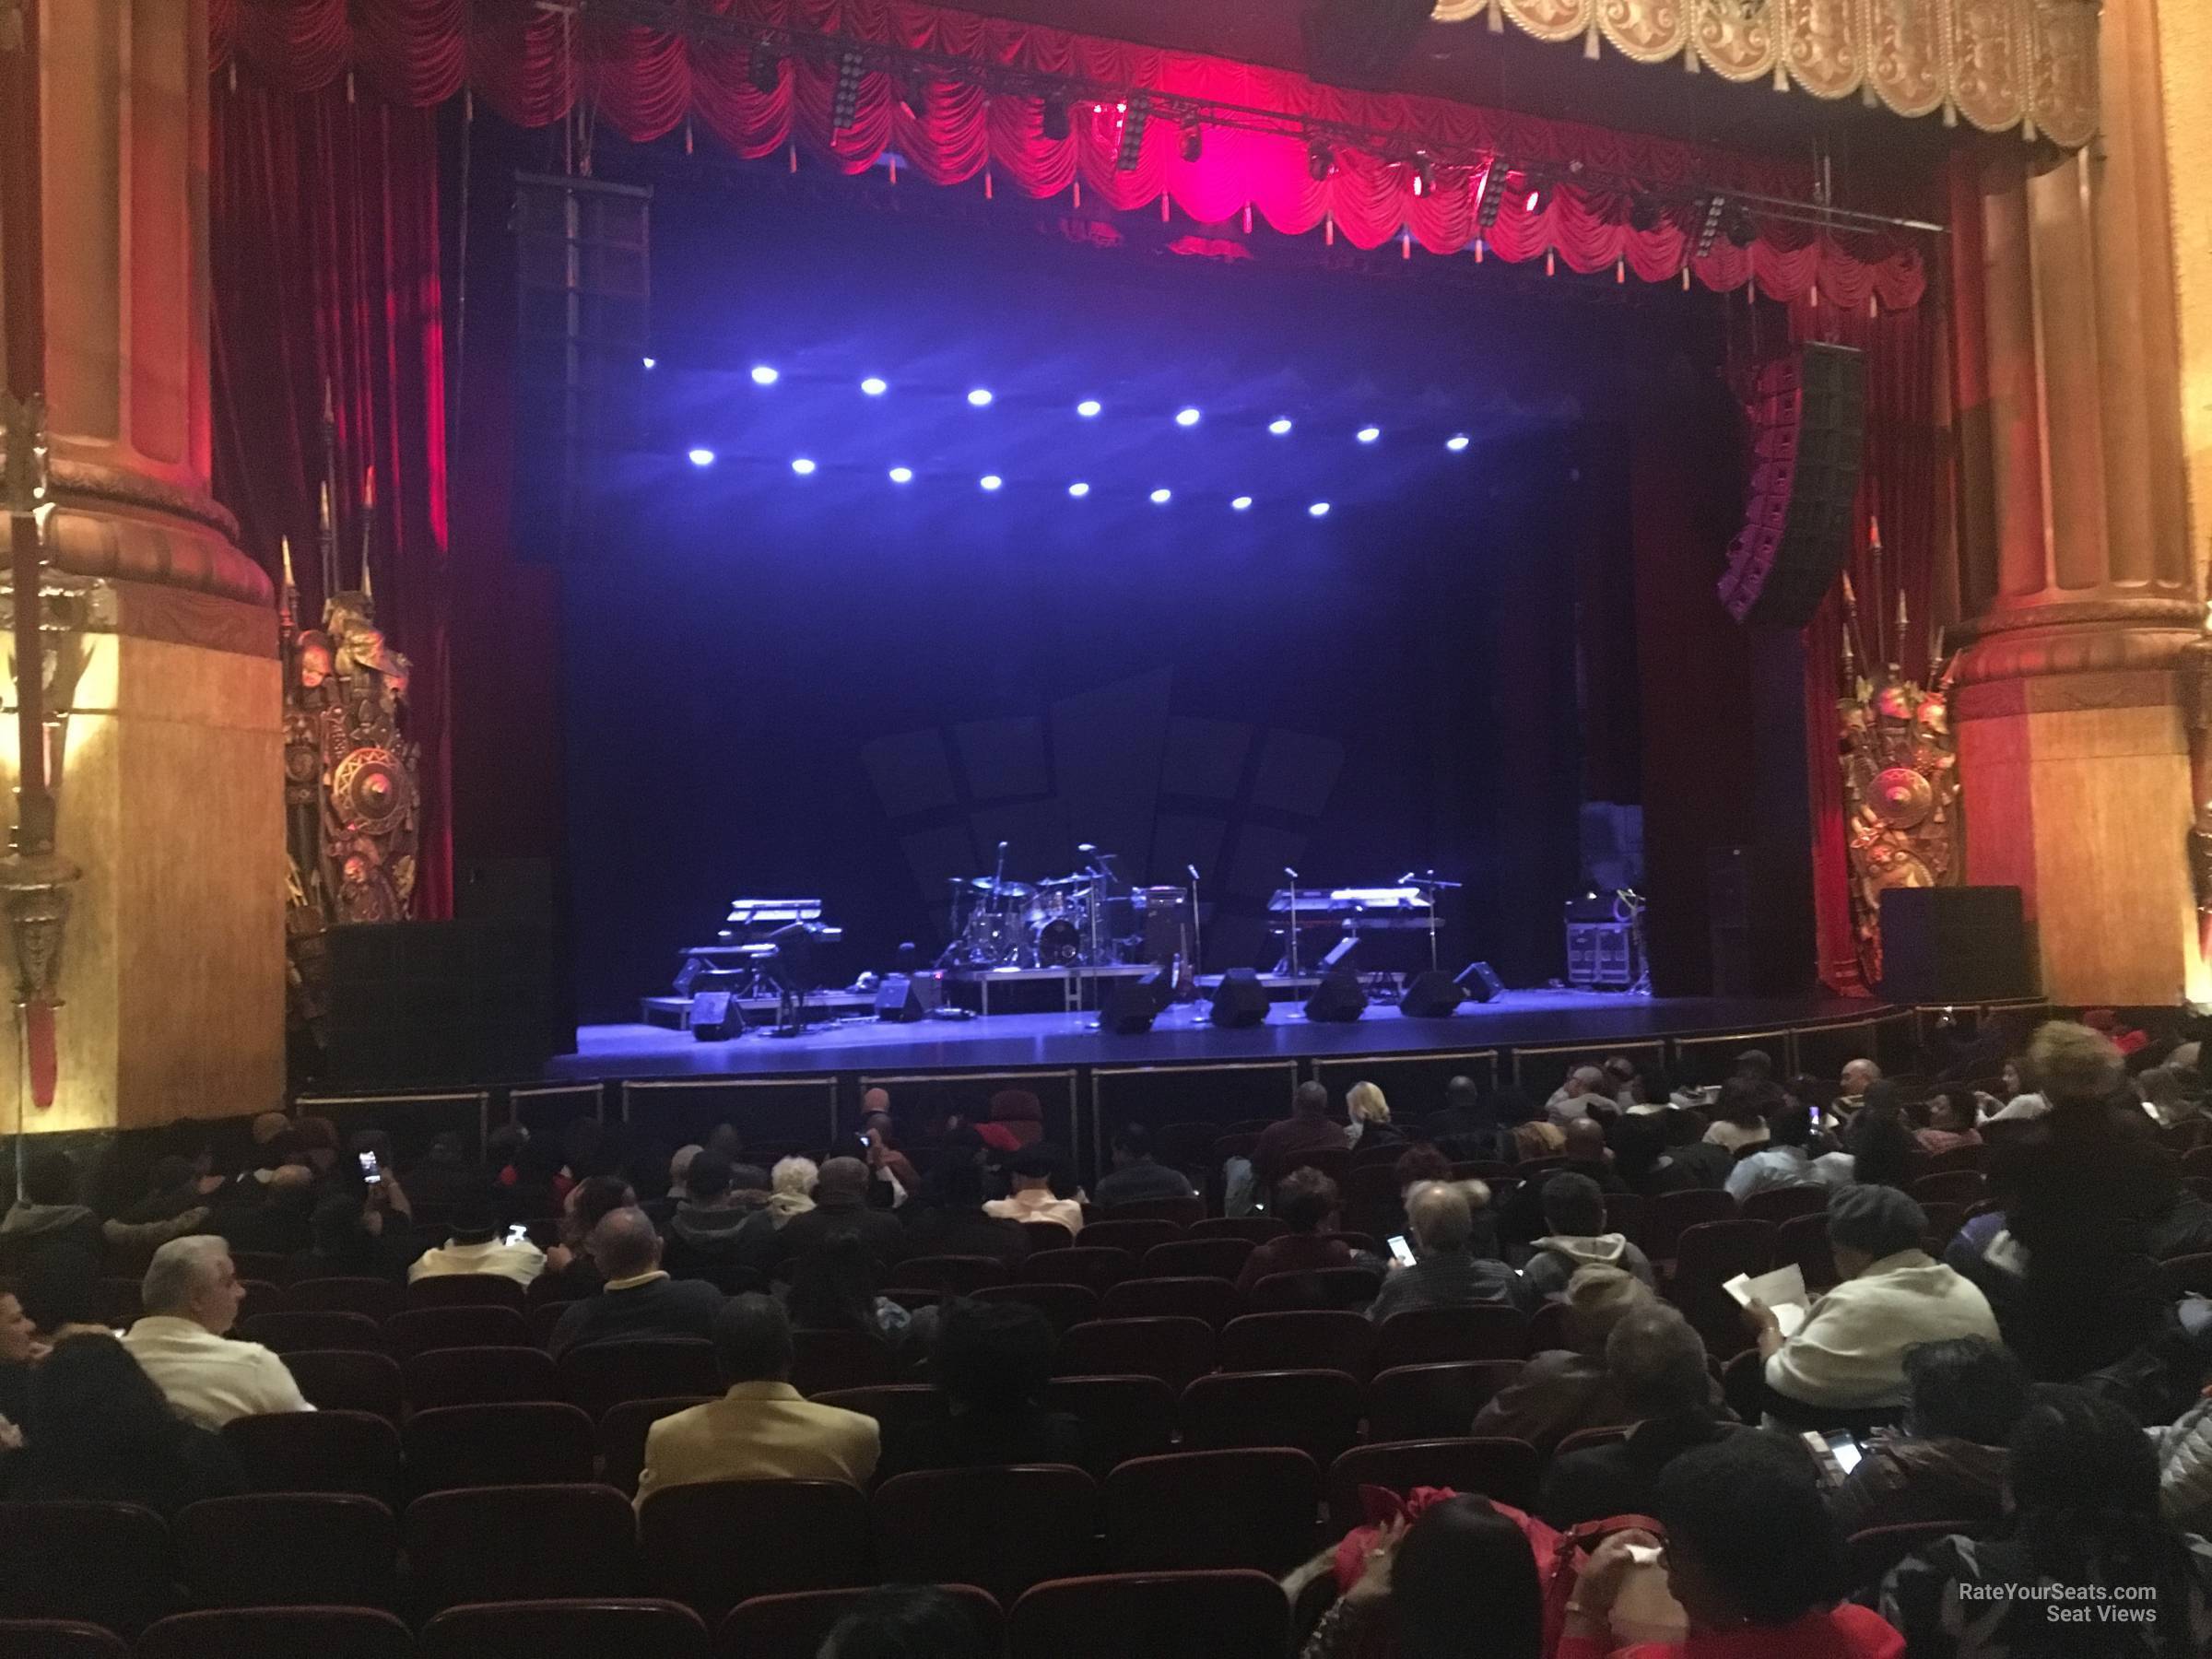 Beacon Theater Interactive Seating Chart